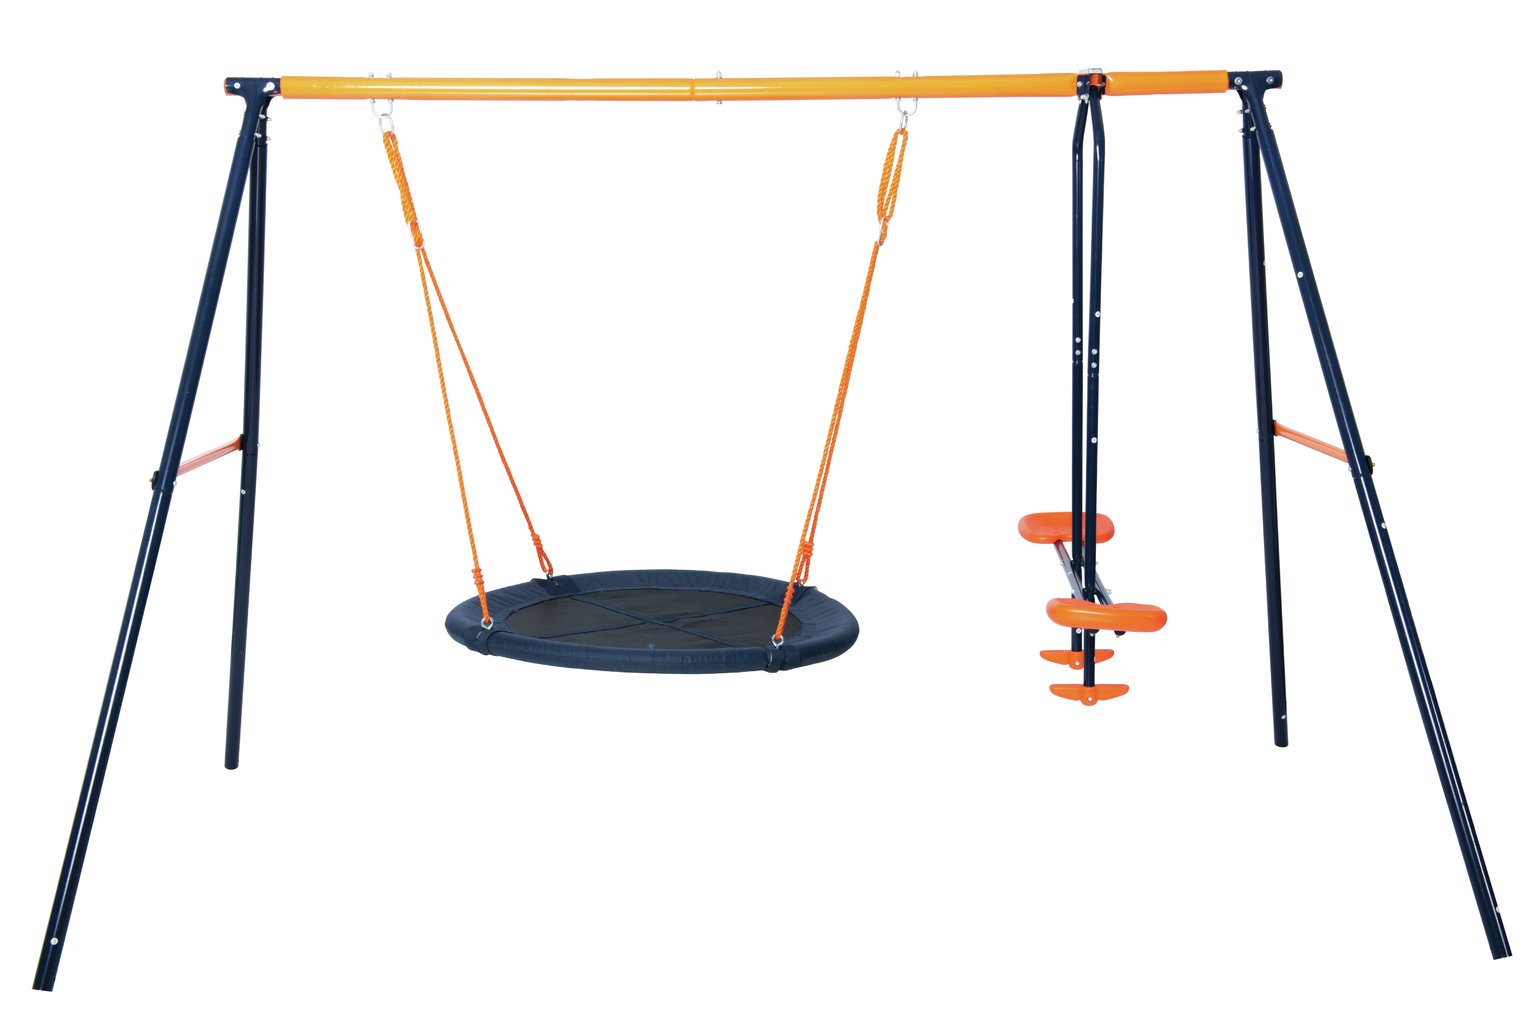 Hedstrom Nebula Kids Outdoor Glider and Swing Set Review